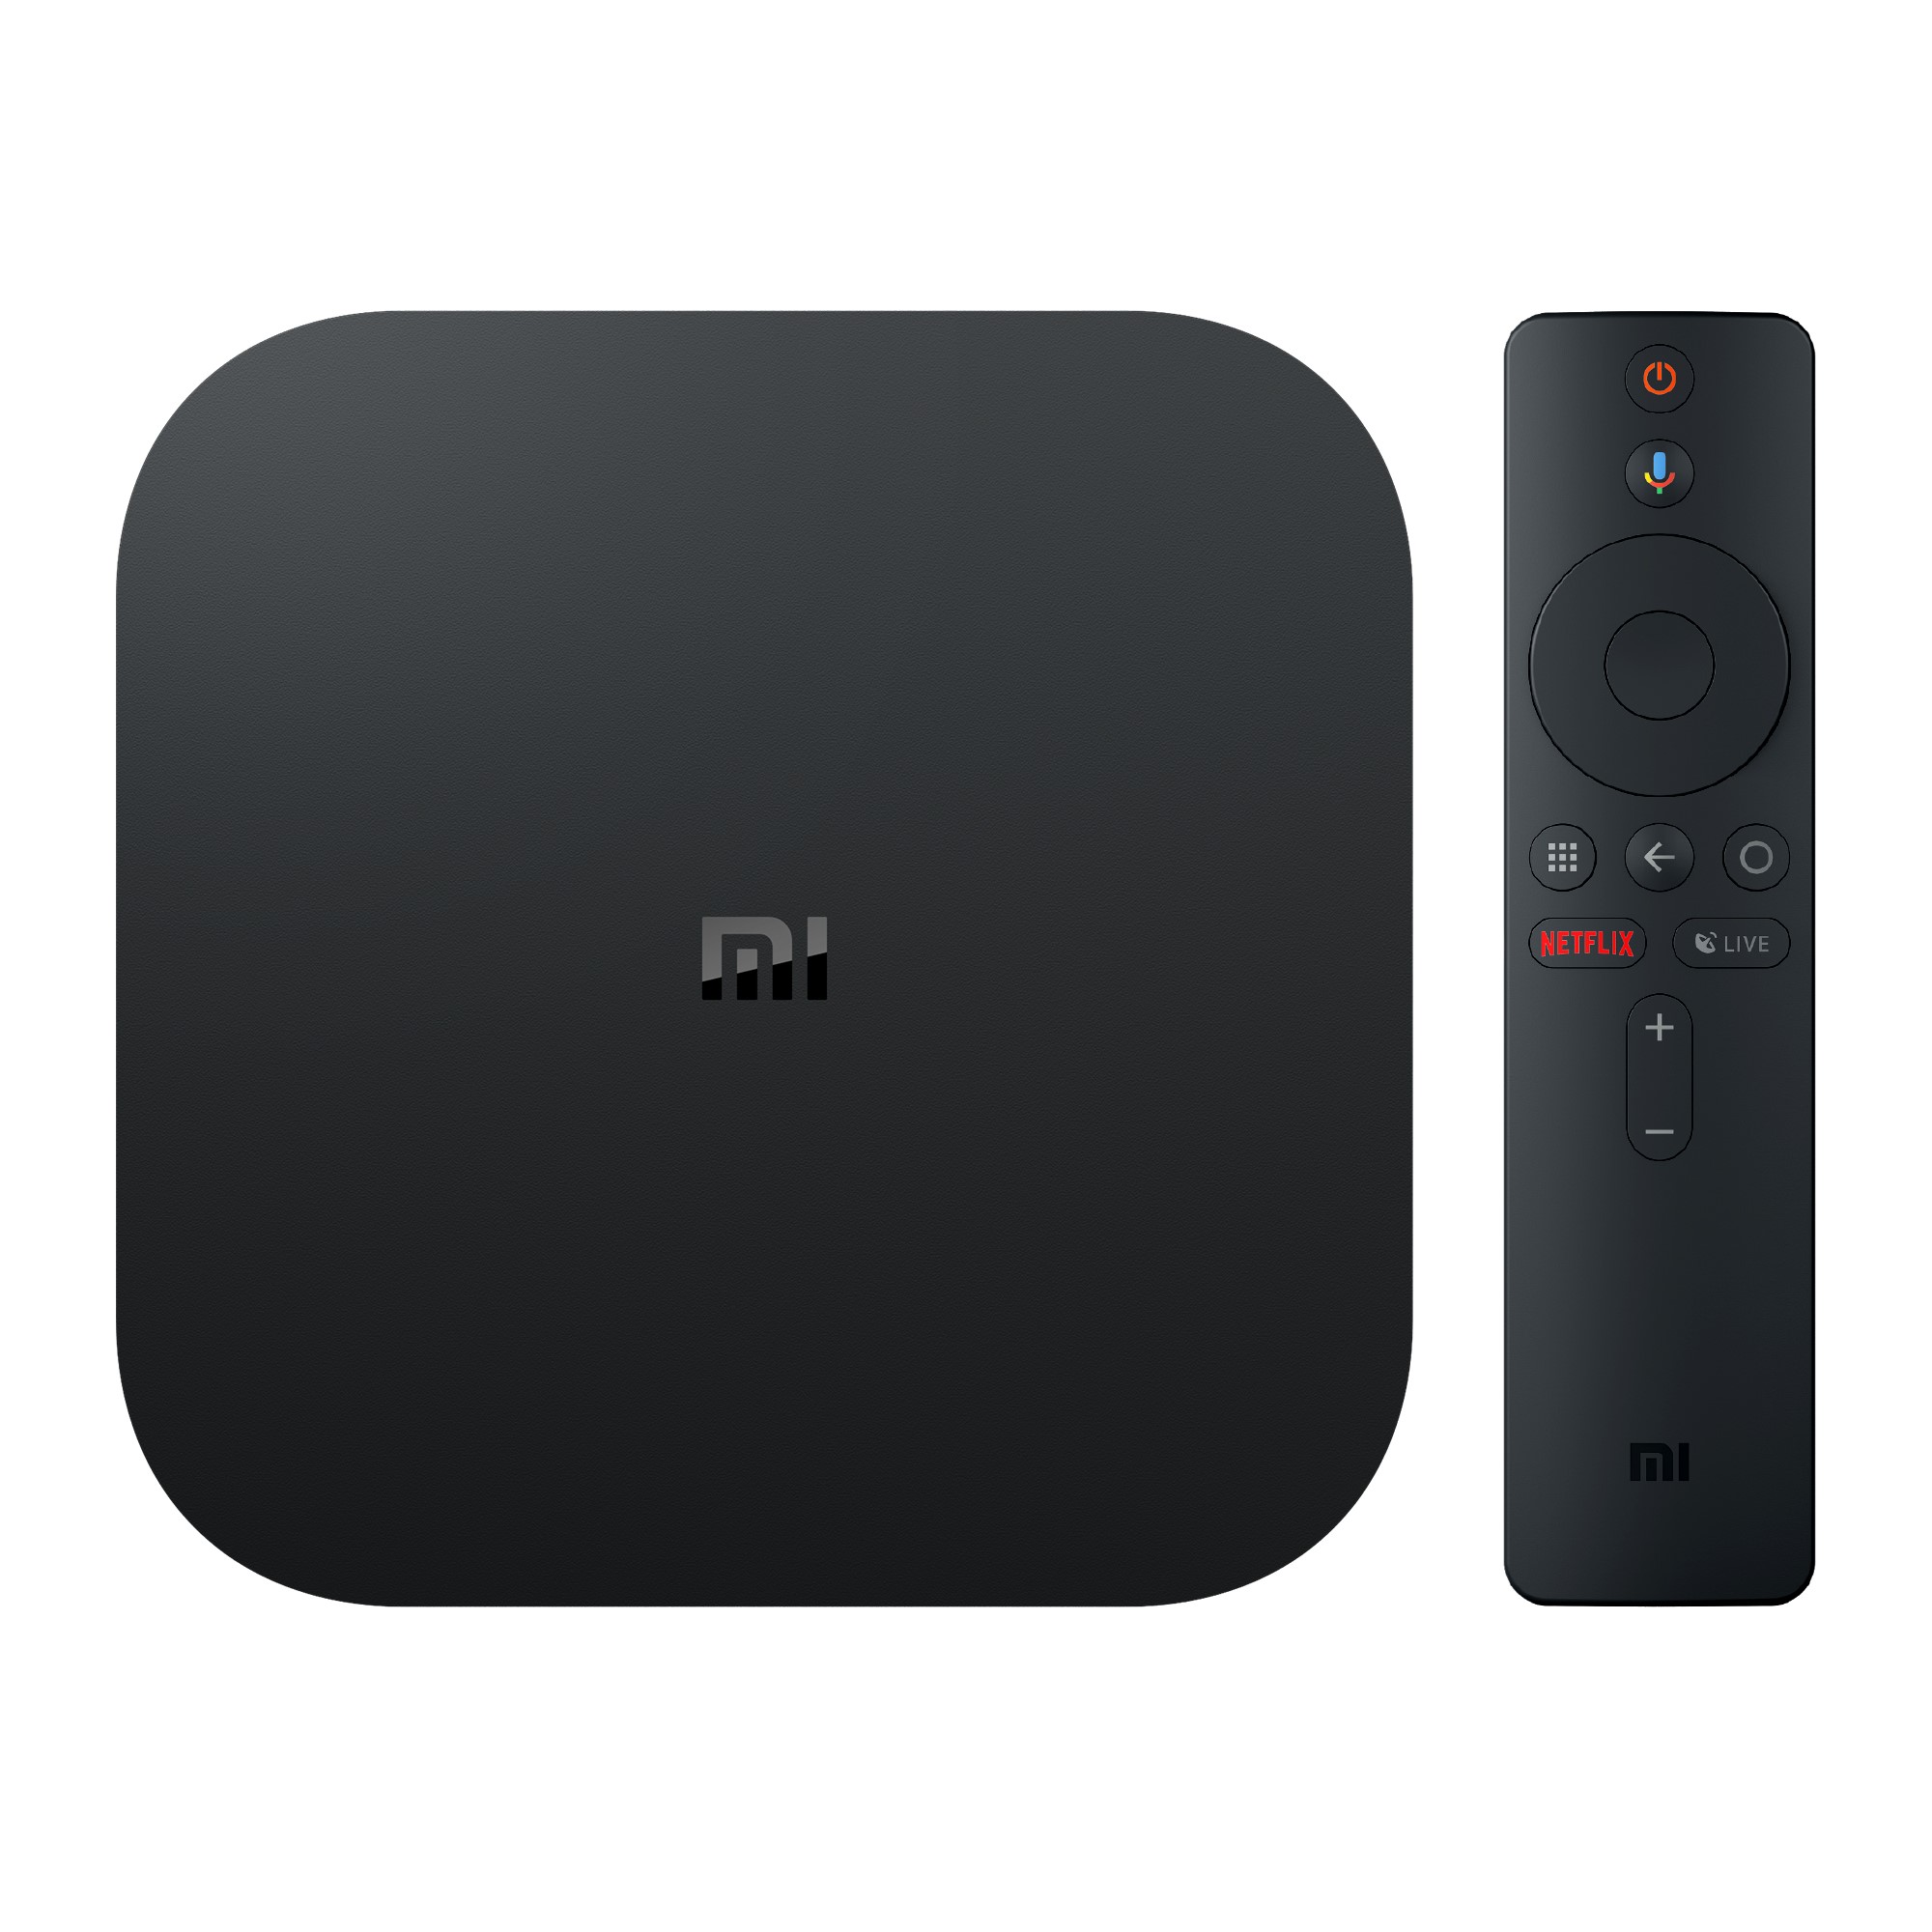 Xiaomi Mi Box S 4K HDR Android TV with Google Assistant Remote Streaming Media Player - image 1 of 8